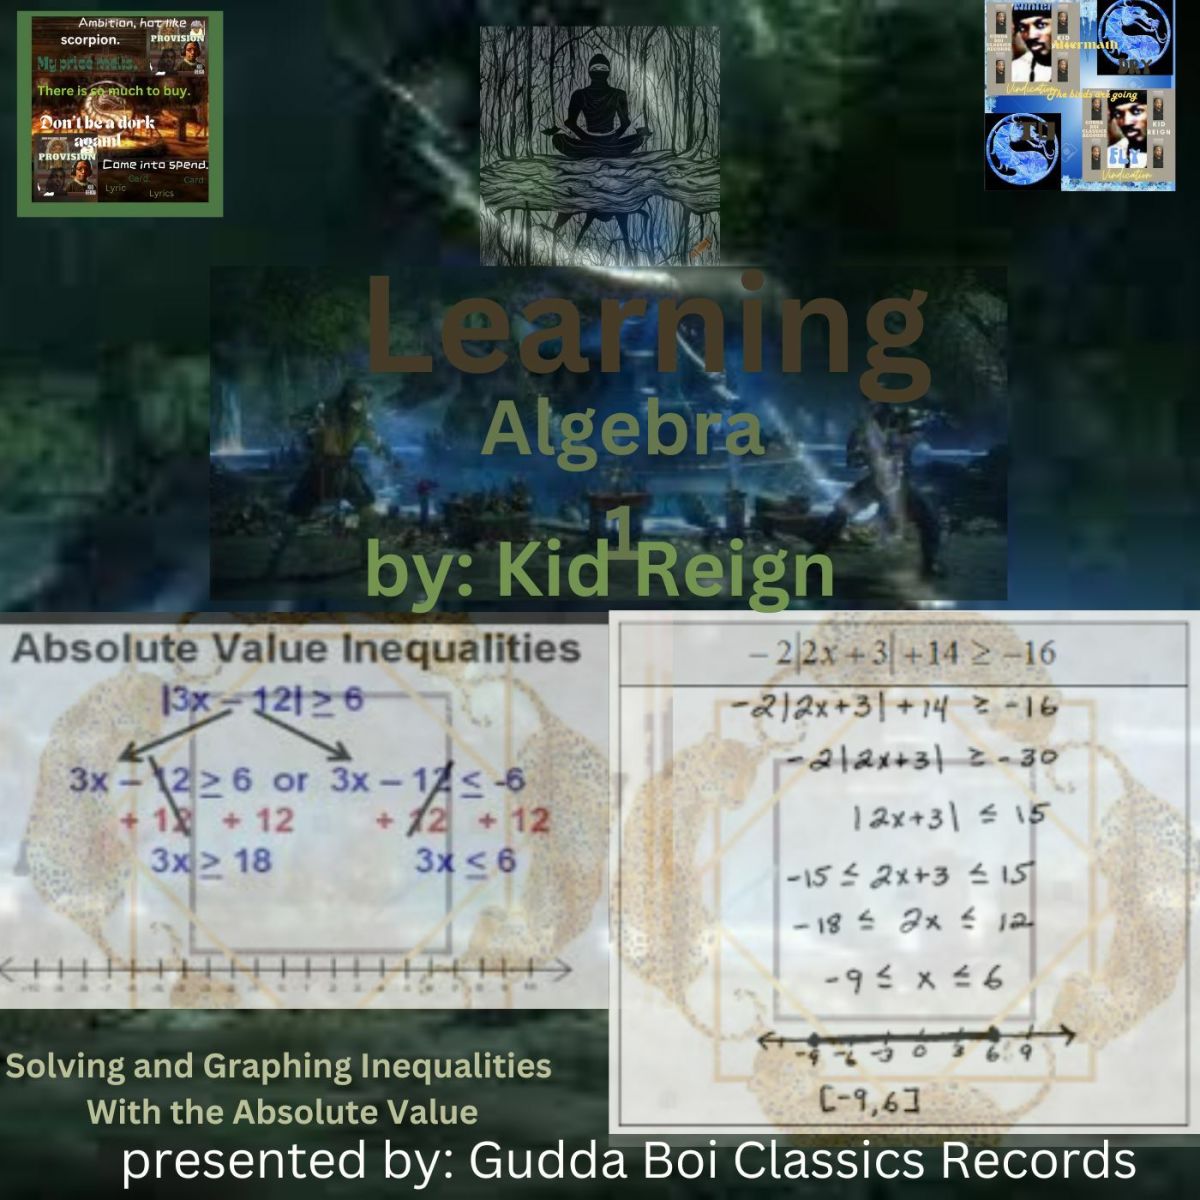 Solving and Graphing an Inequality with the Absolute Value - by Kid Reign - presented by Gudda Boi Classics Records